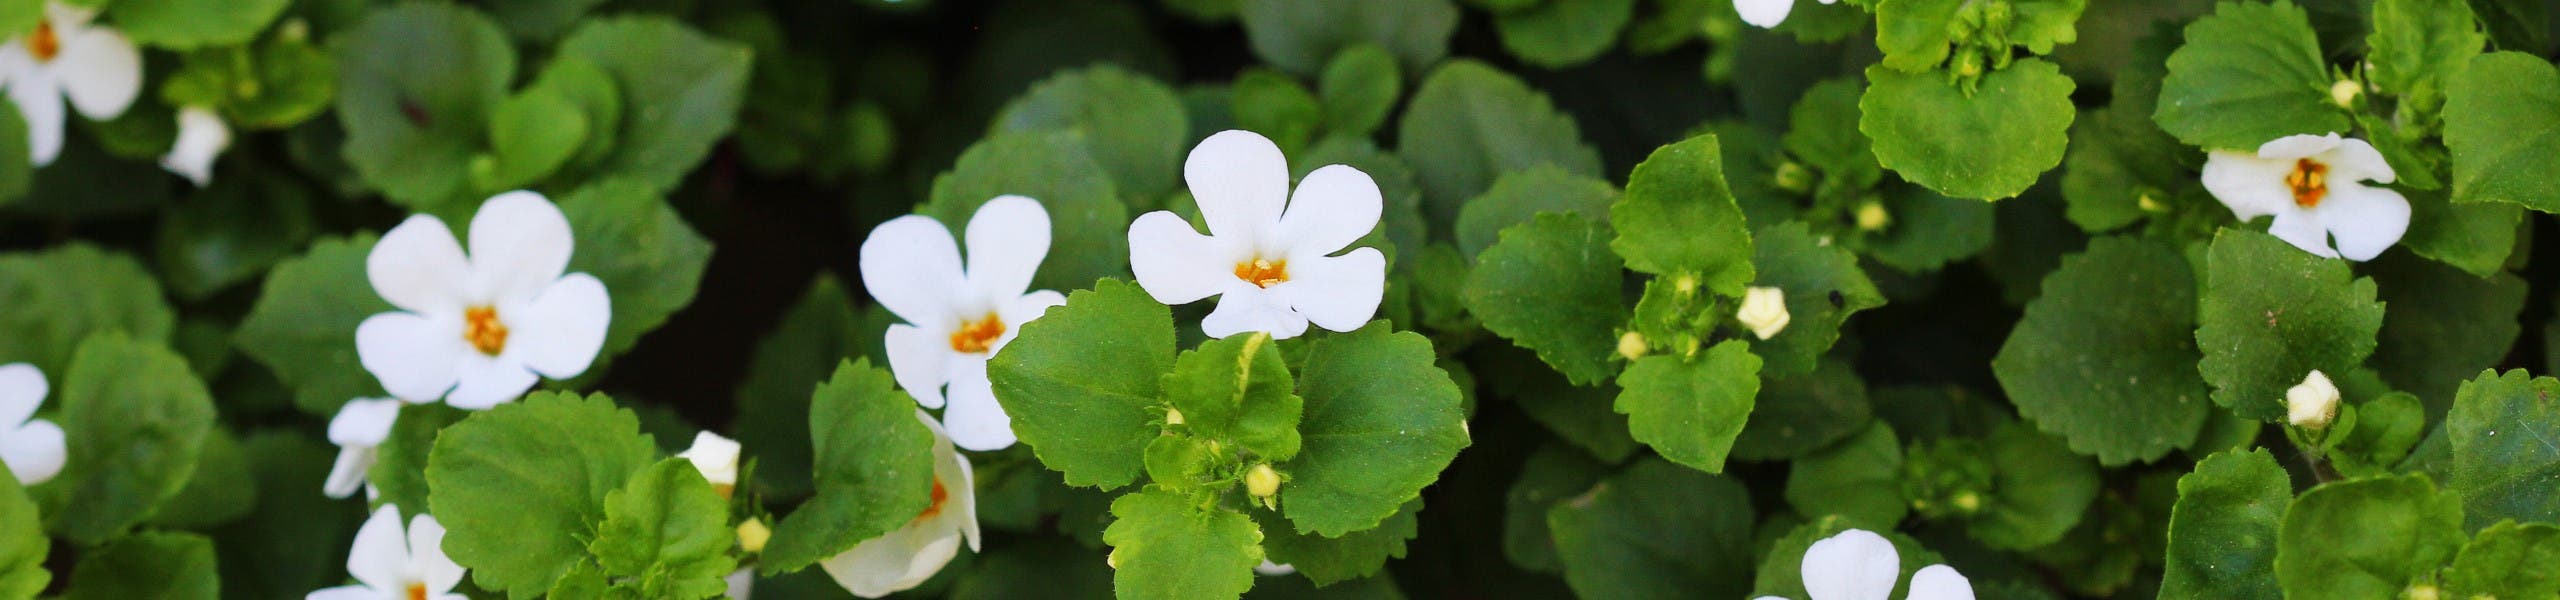 Bacopa monnieri plant and flowers